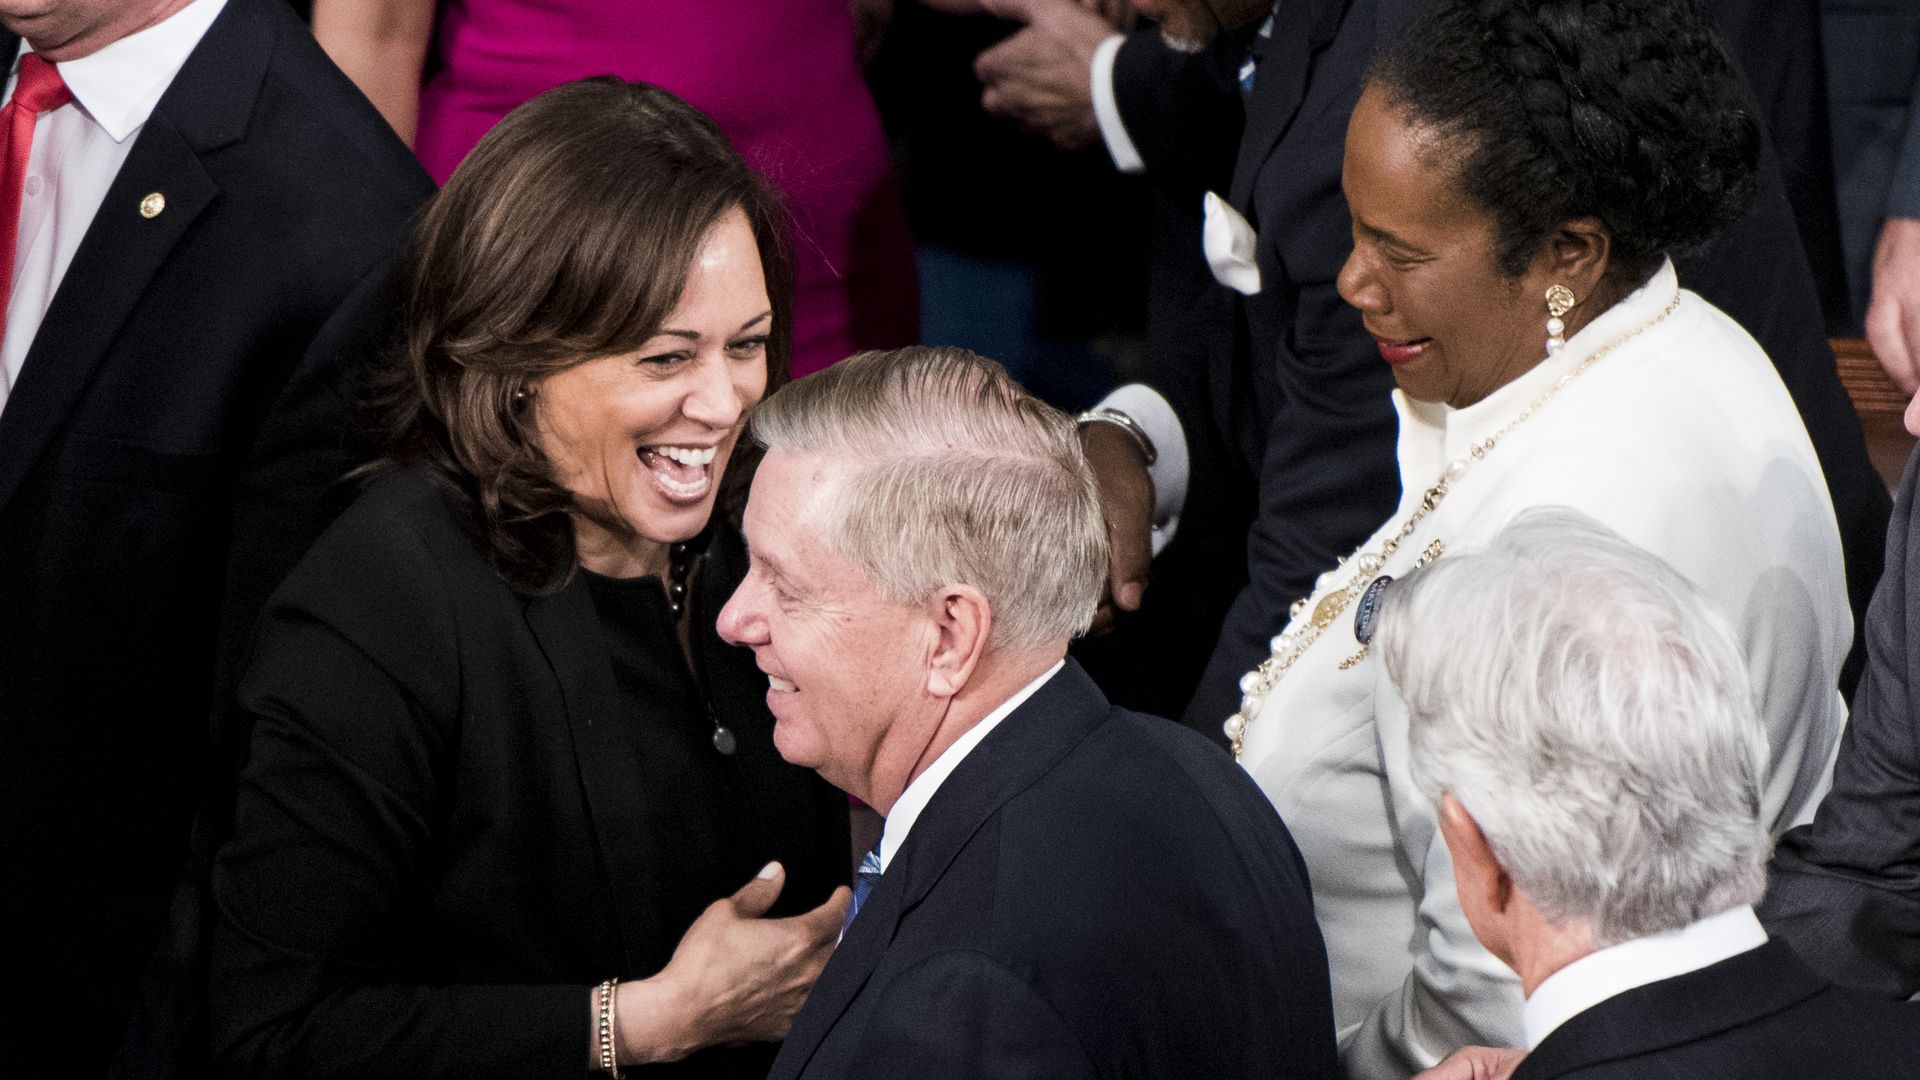 Sen. Kamala Harris, D-Calif., and Sen. Lindsey Graham, R-S.C., arrive for President Donald Trump's State of the Union Address to a joint session of Congress in the Capitol on Tuesday, Feb. 5.